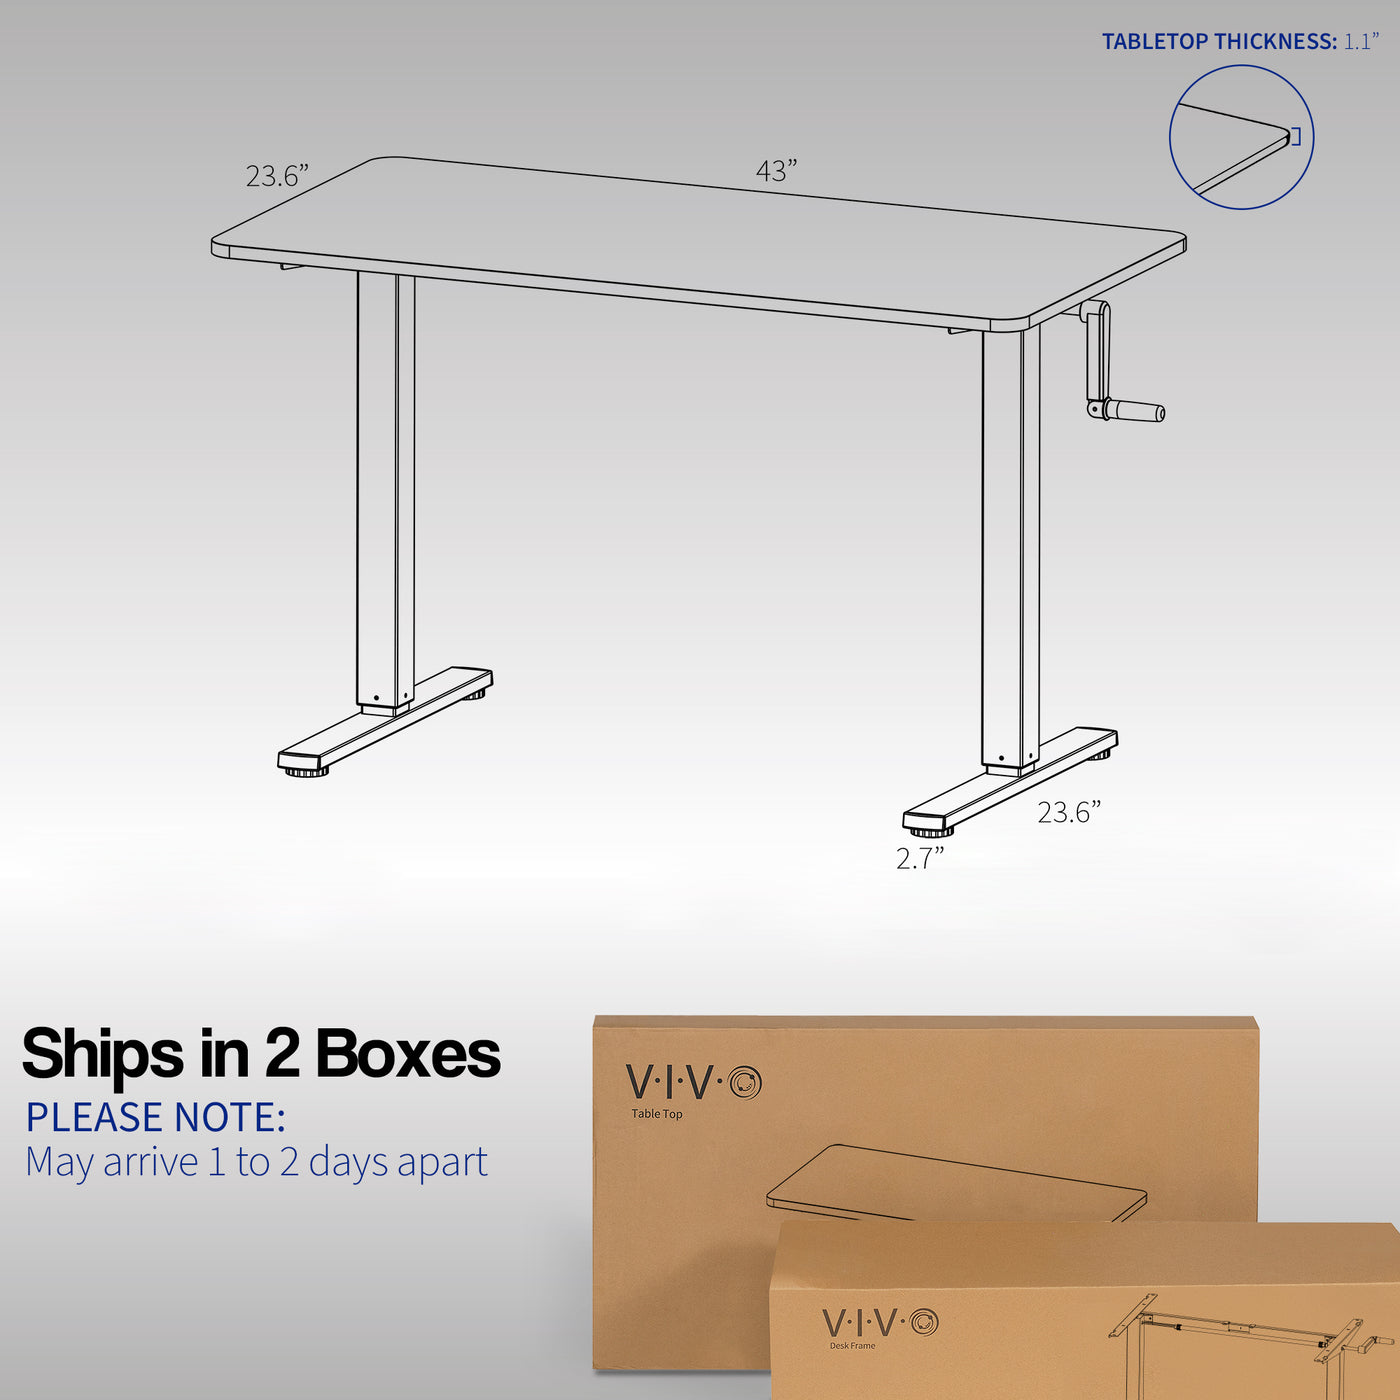 Please note that the desk ships in two boxes and may arrive on separate days.